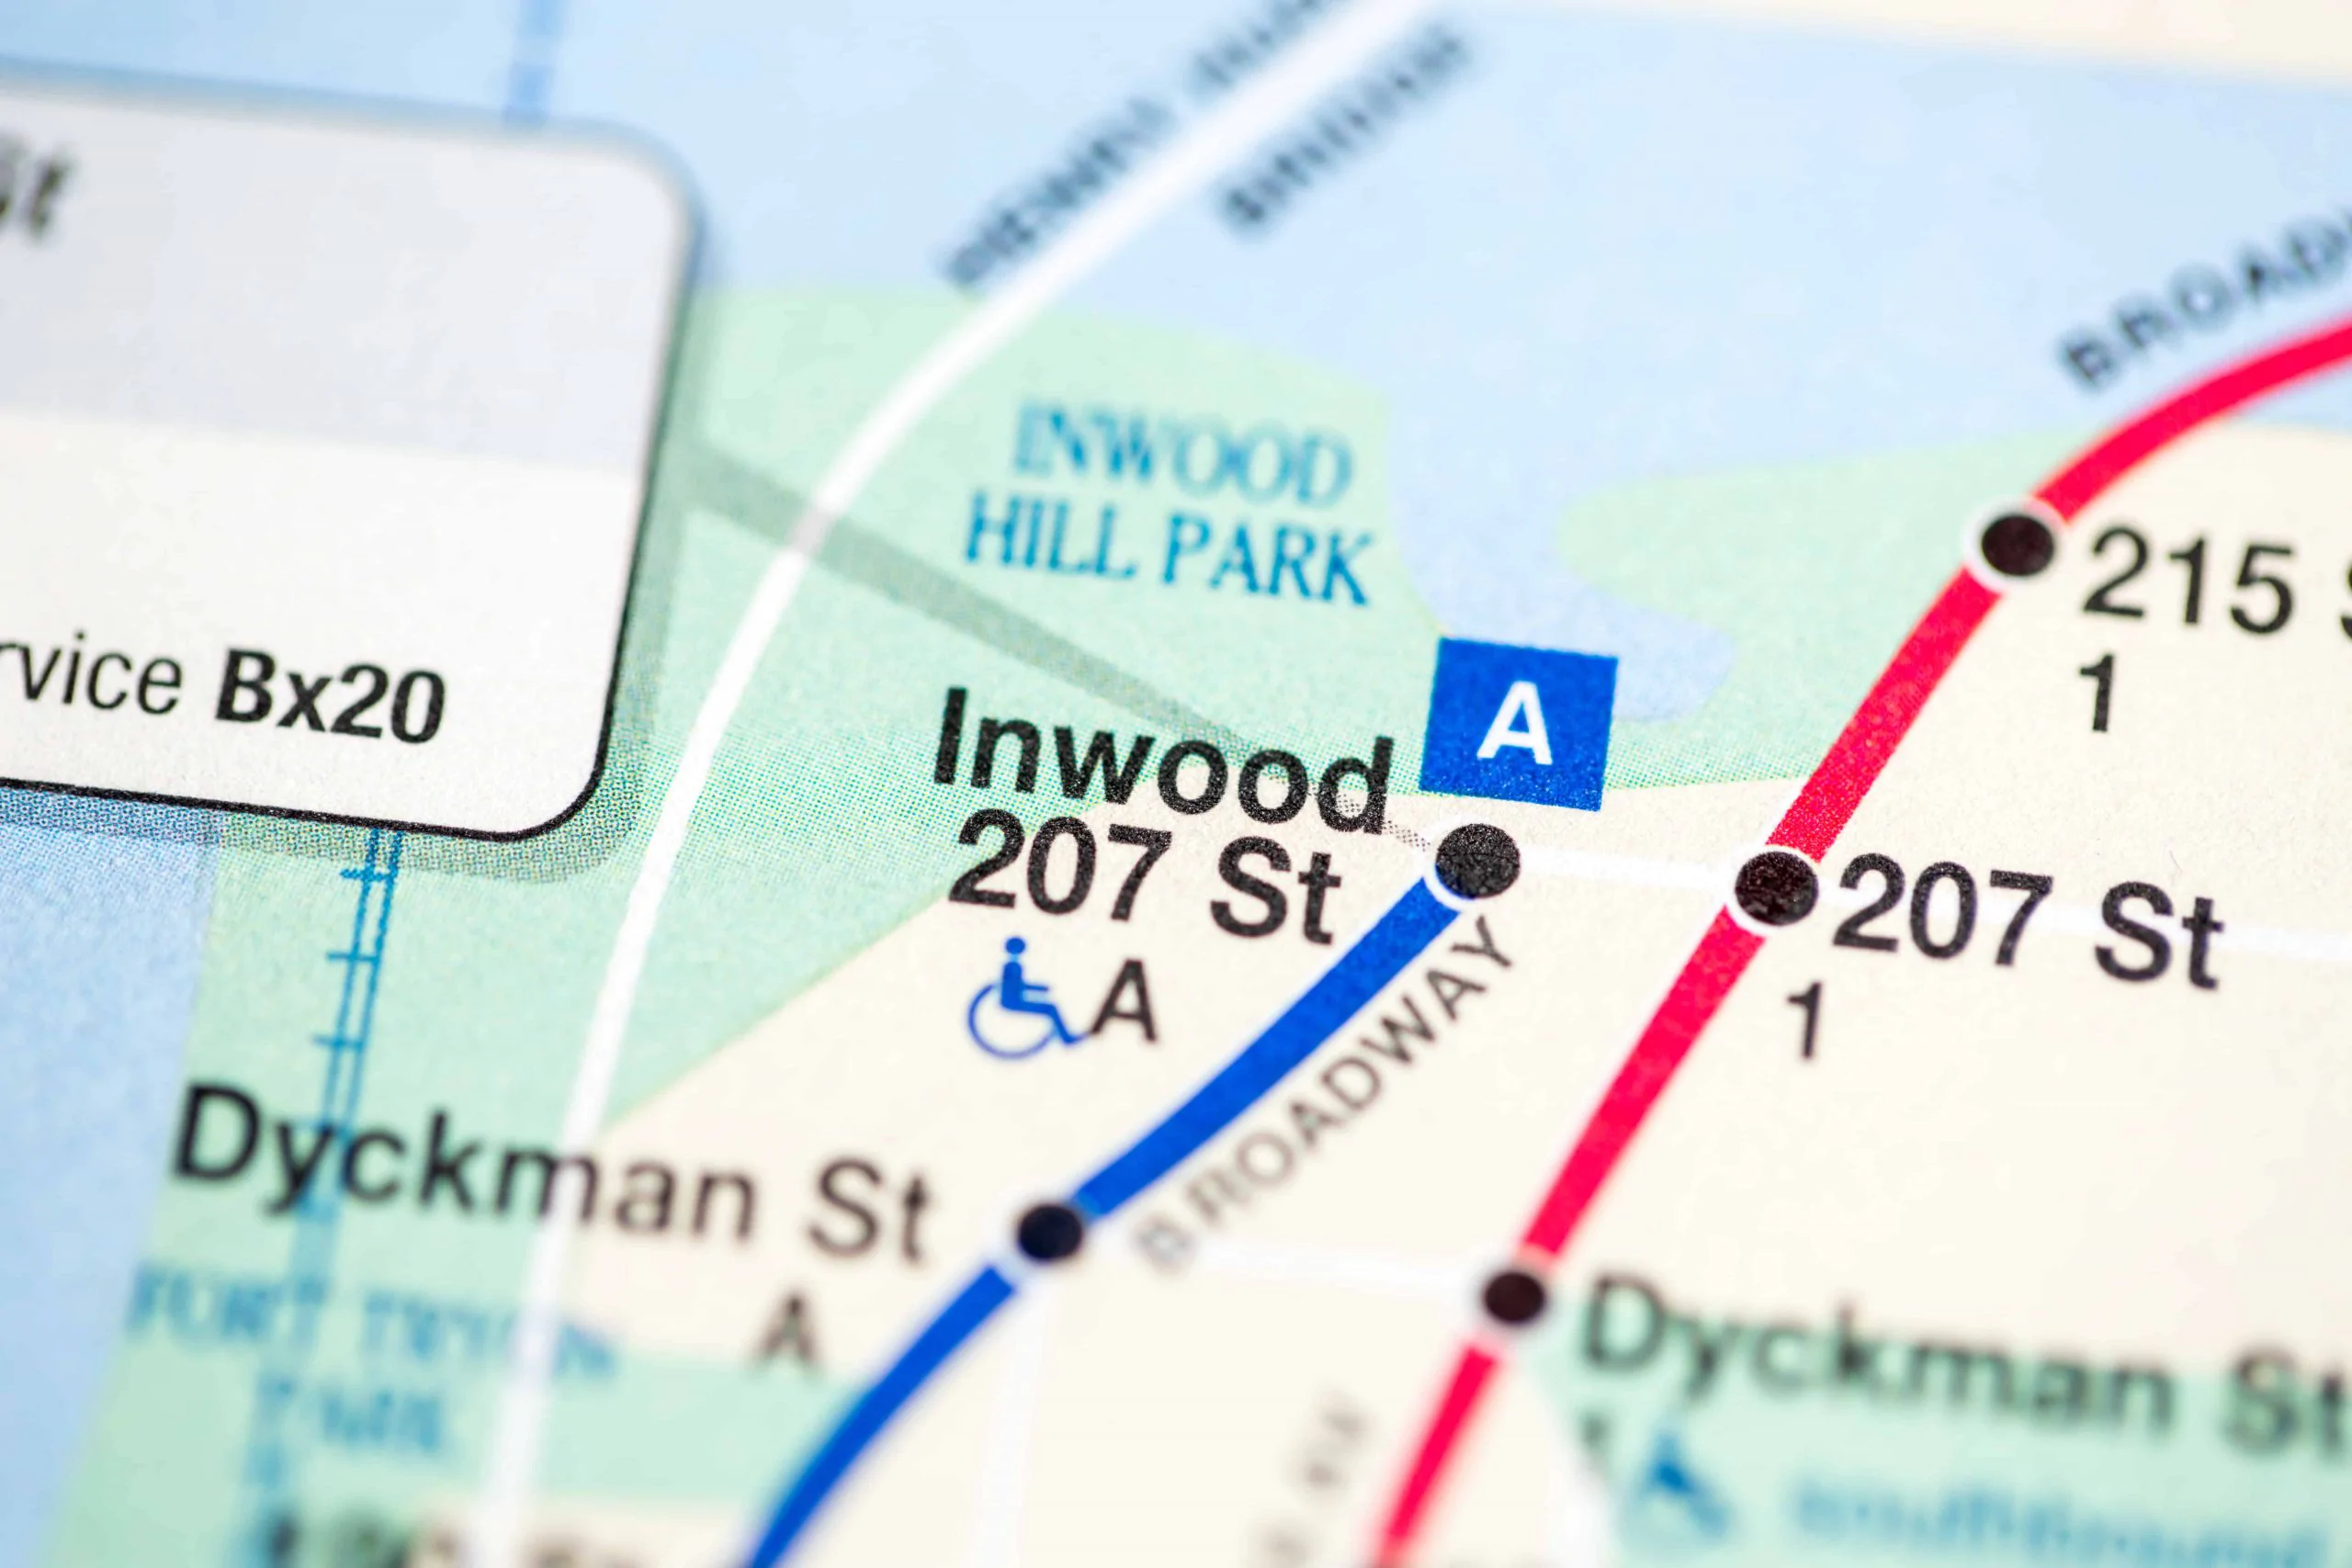 Car Accidents in Inwood, NY